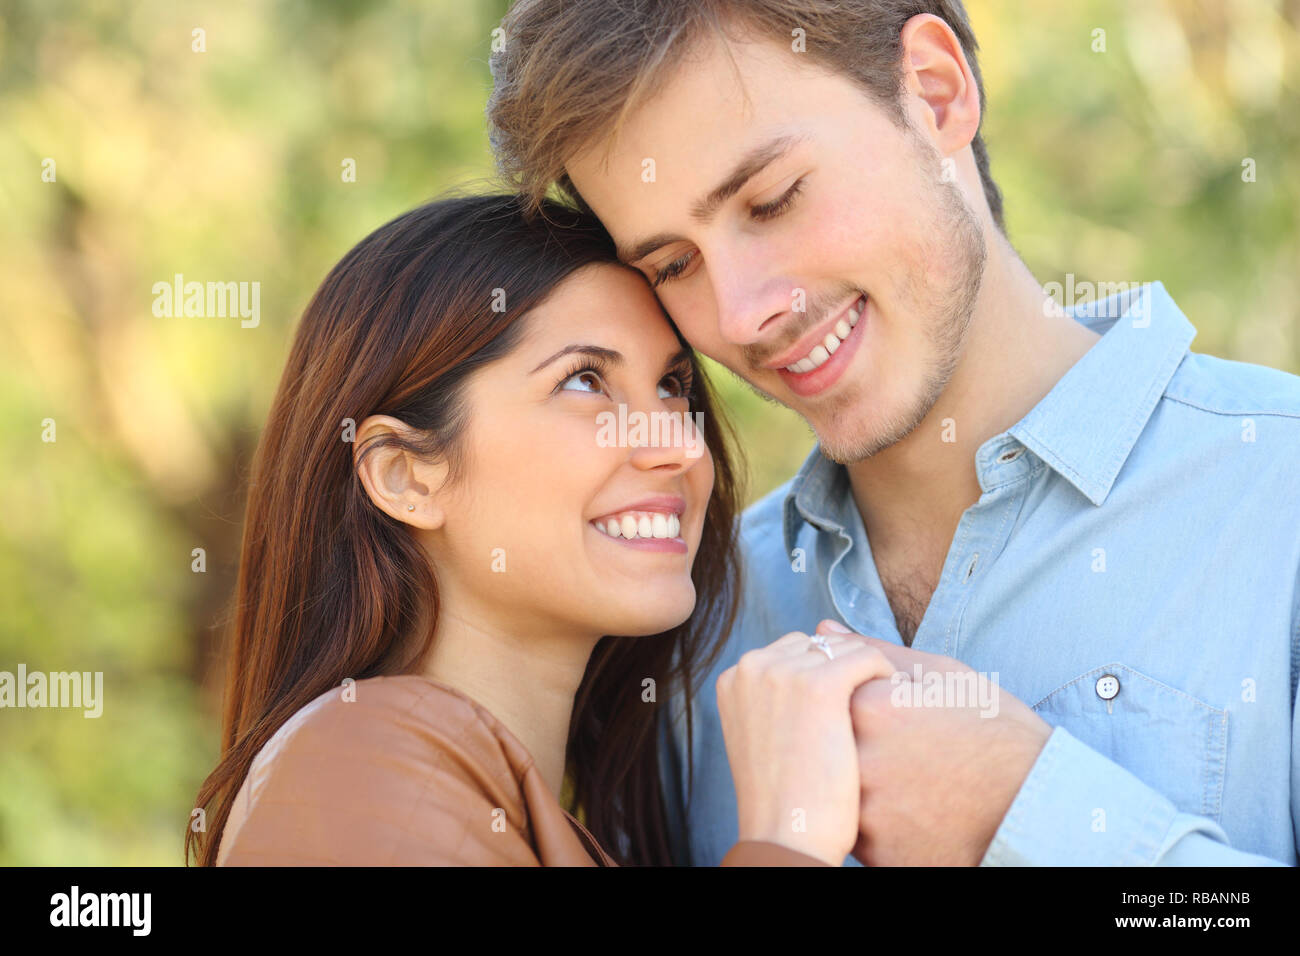 Premium Photo  Two young lovers. profiles of romantic couple looking at  each other